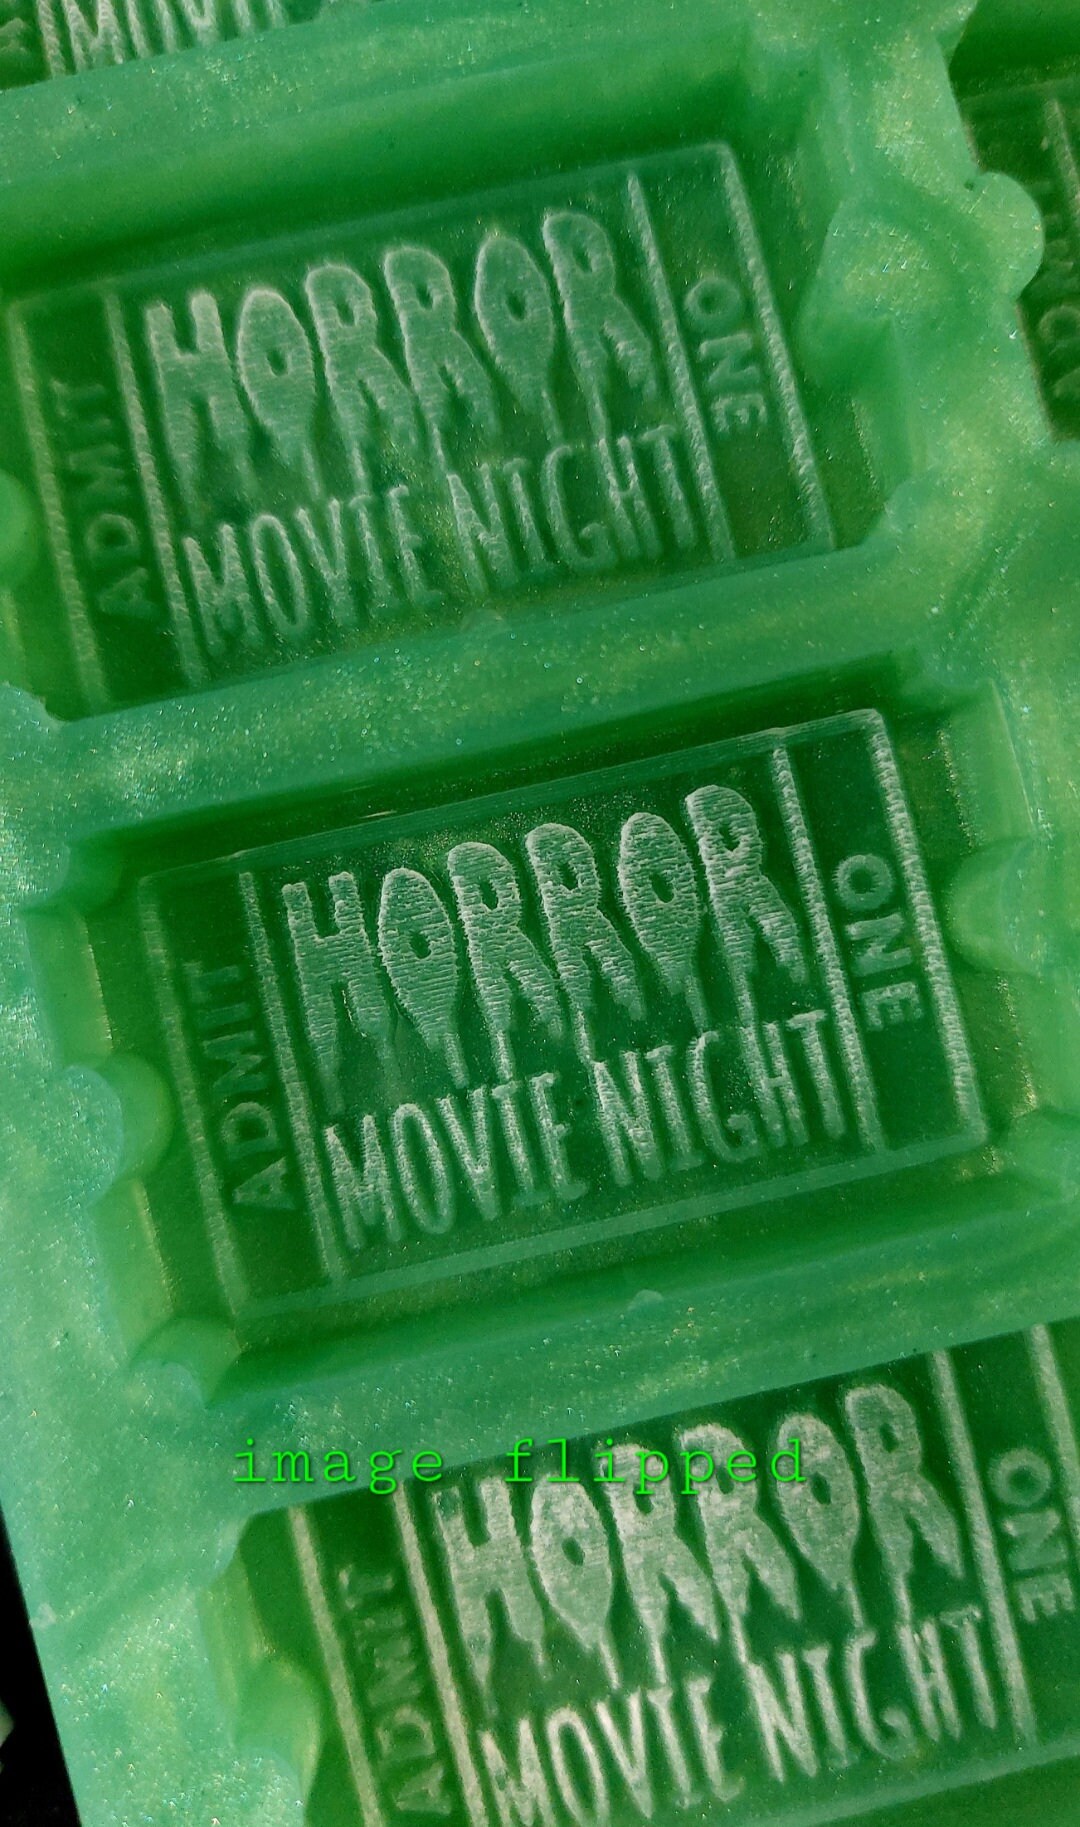 Horror Movie Ticket 8 Cell Silicone Mould for wax, resin and more (HBbox size)